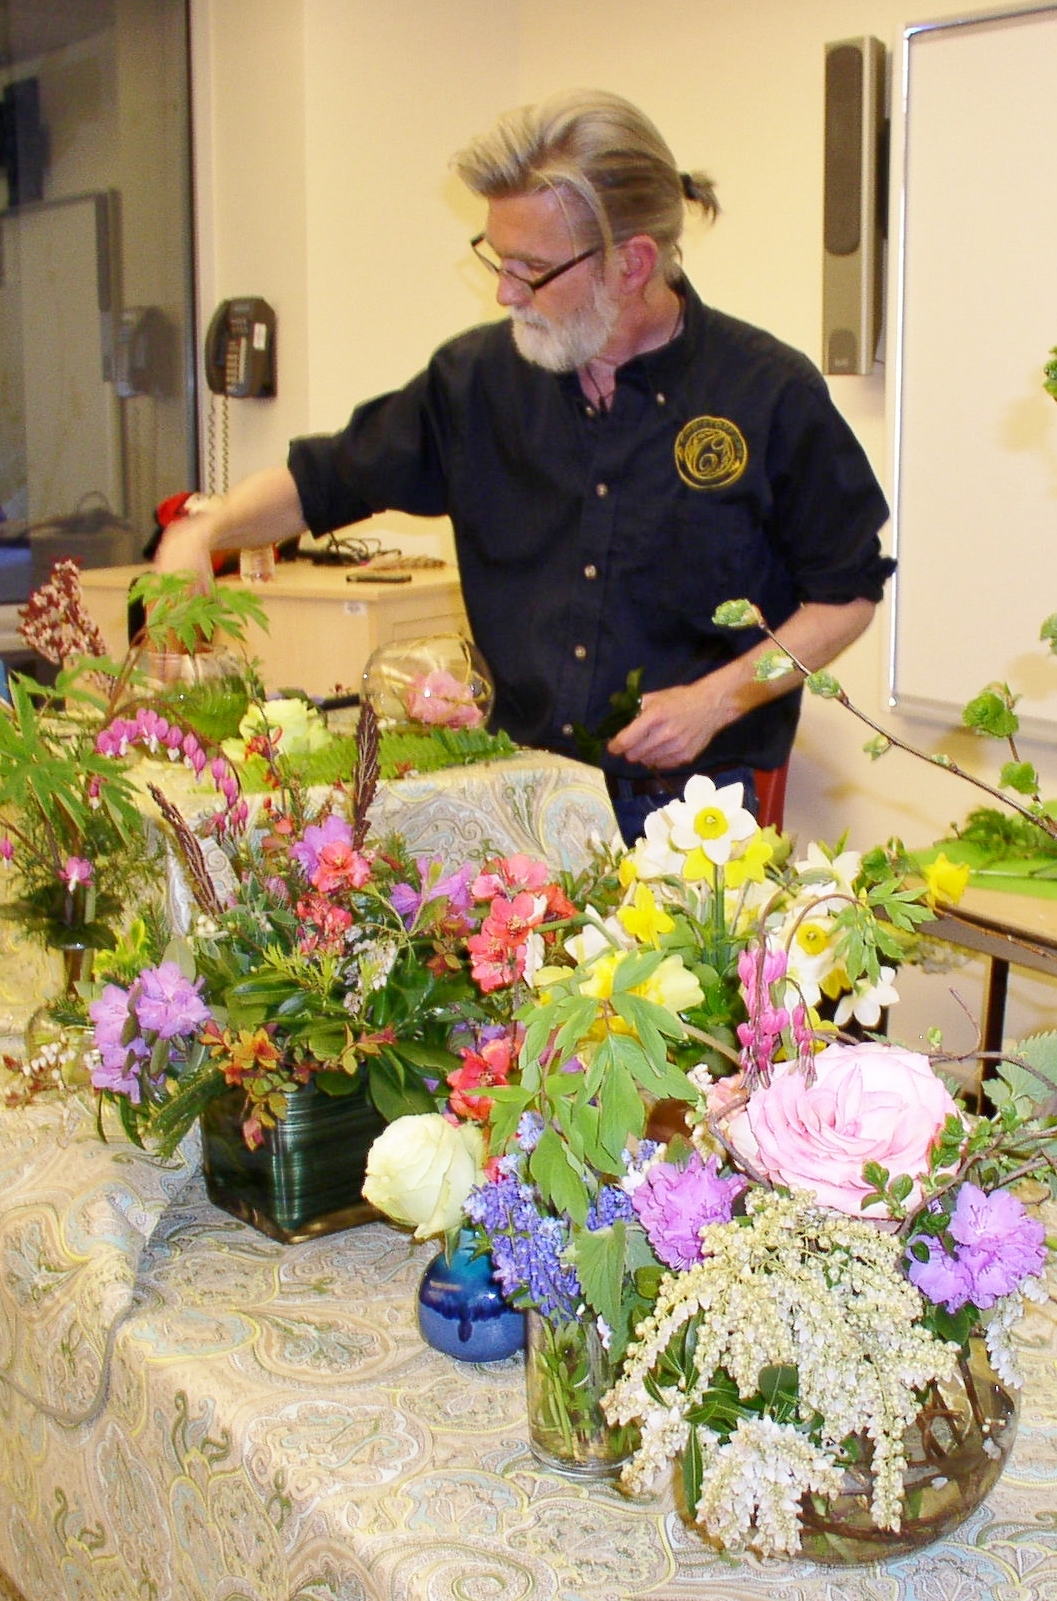 Register Online For A Flower Arranging Workshop With Kurt Christoffers County Of Union,Blue Wall Living Room